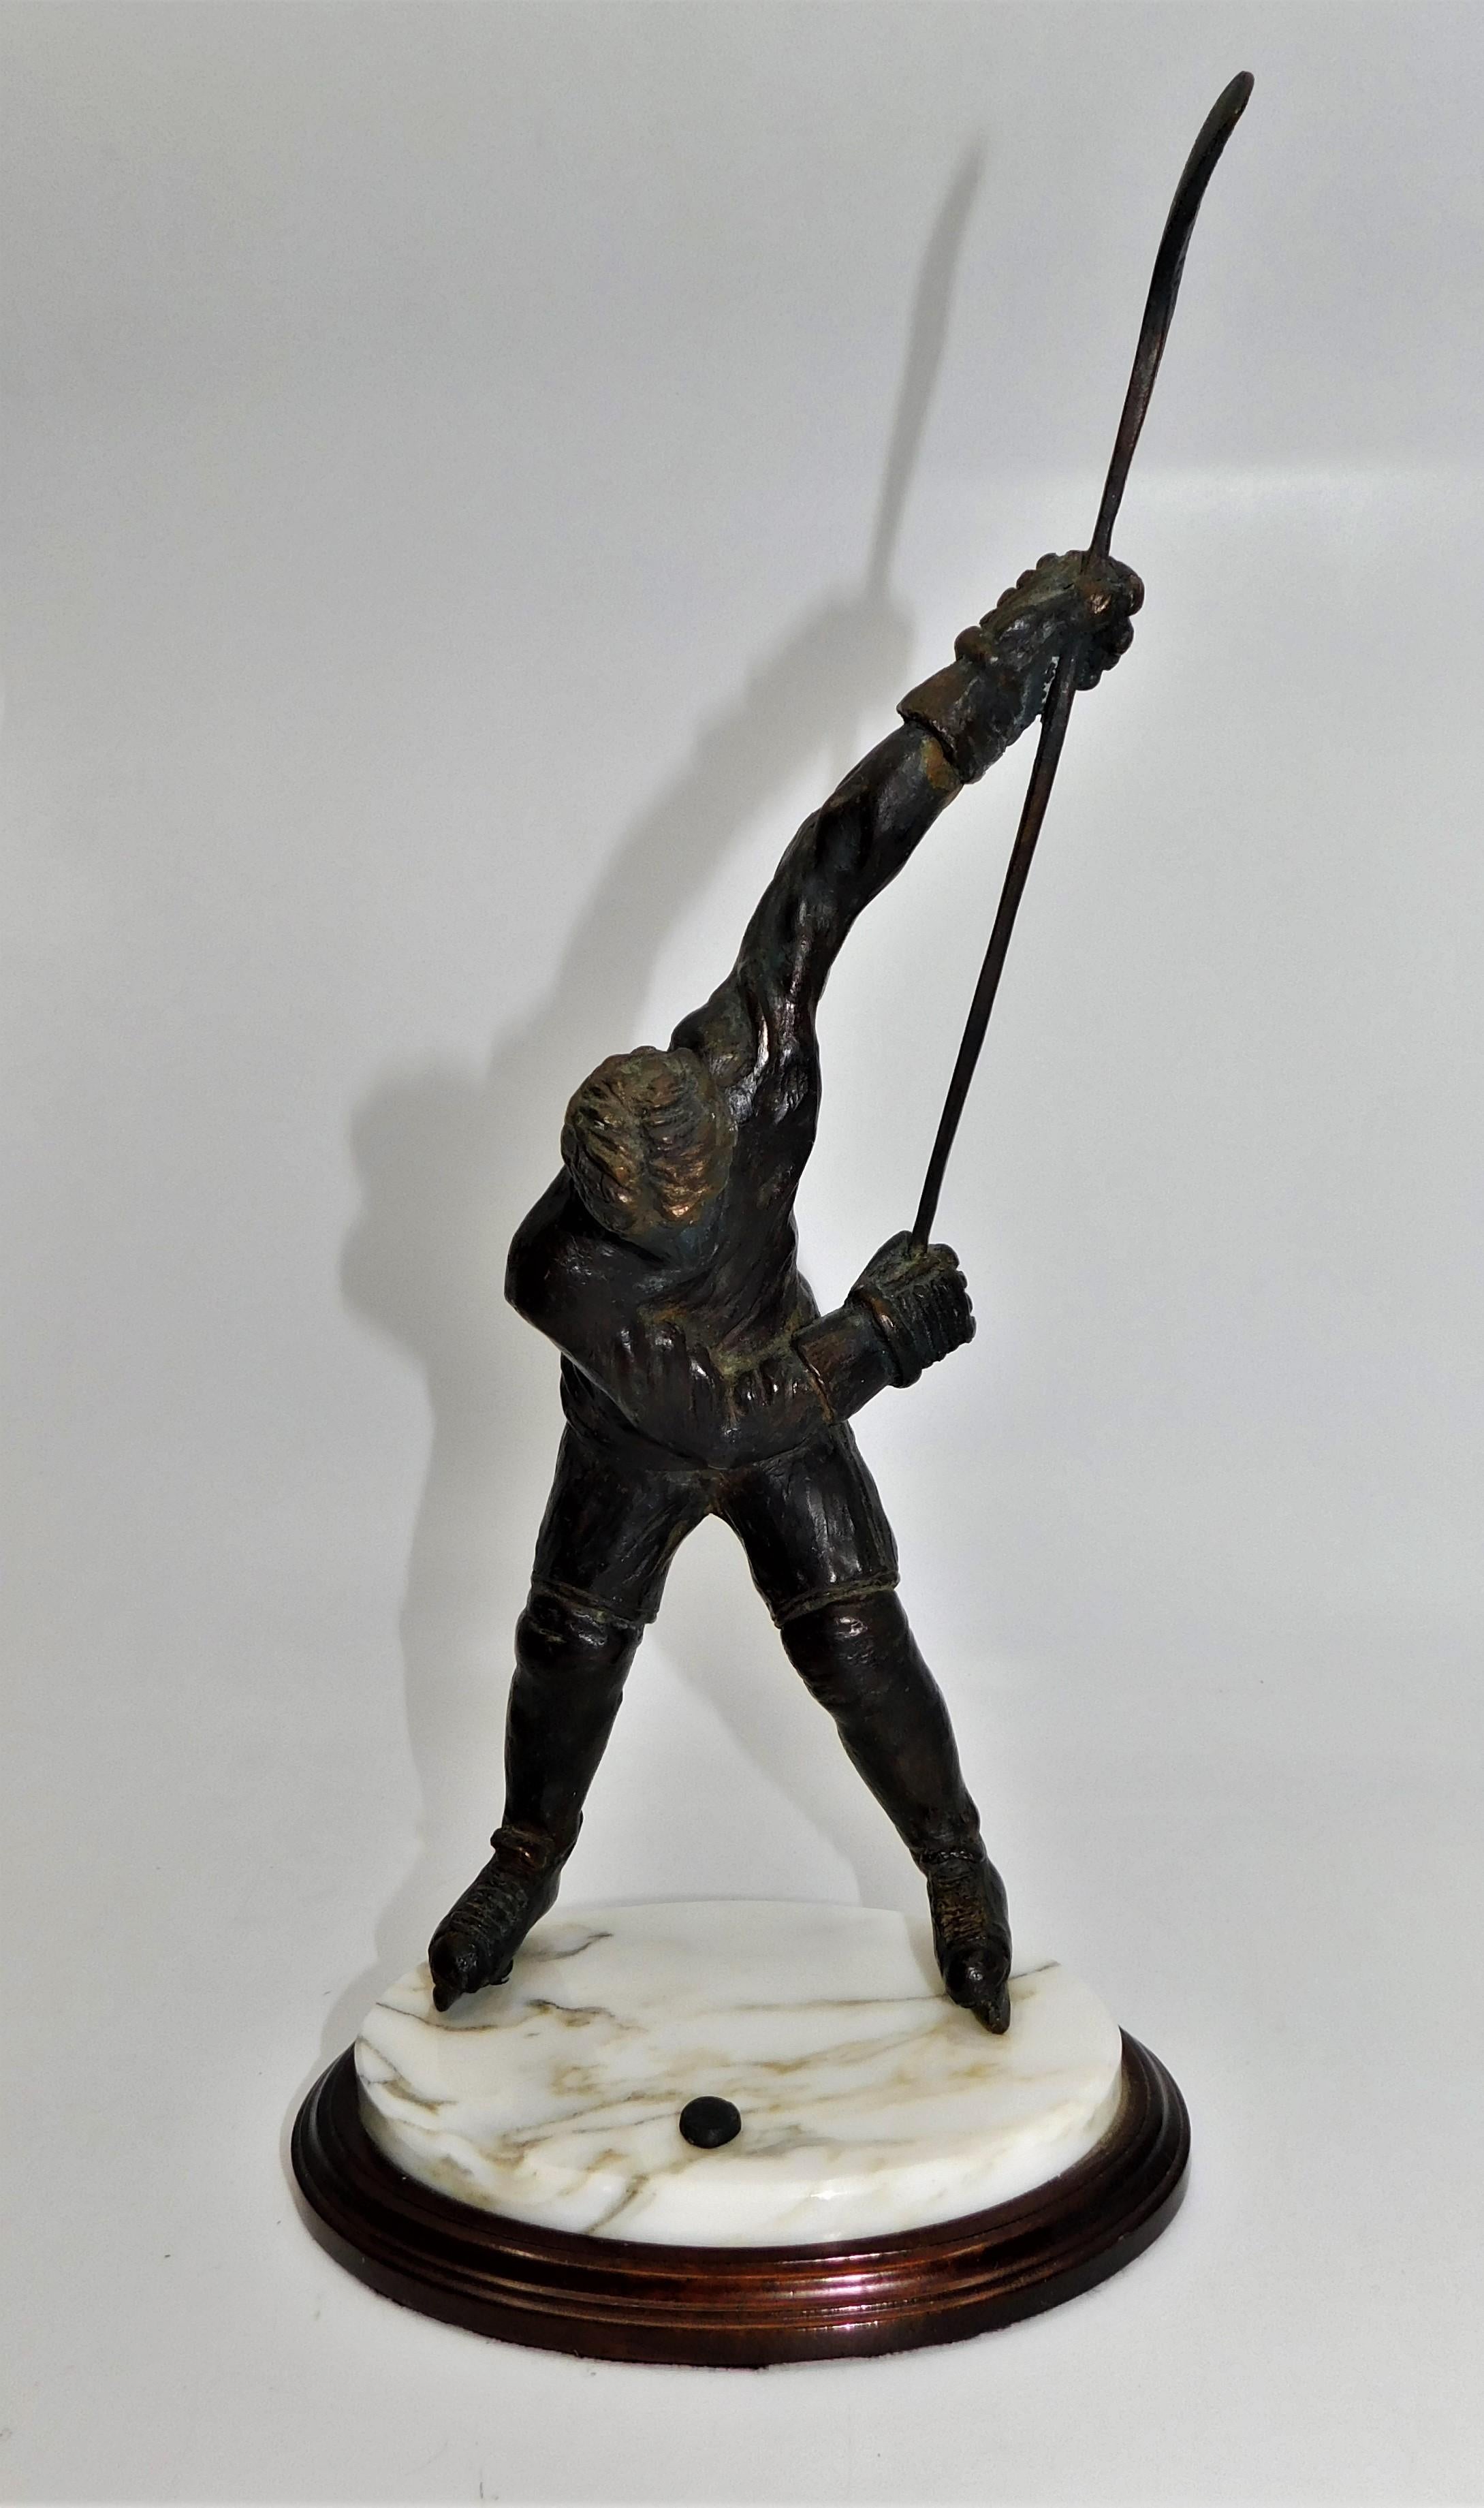 Canadian Wayne Gretzky 1985 Limited-Edition Hand Sculpted Bronze Statue #20/200